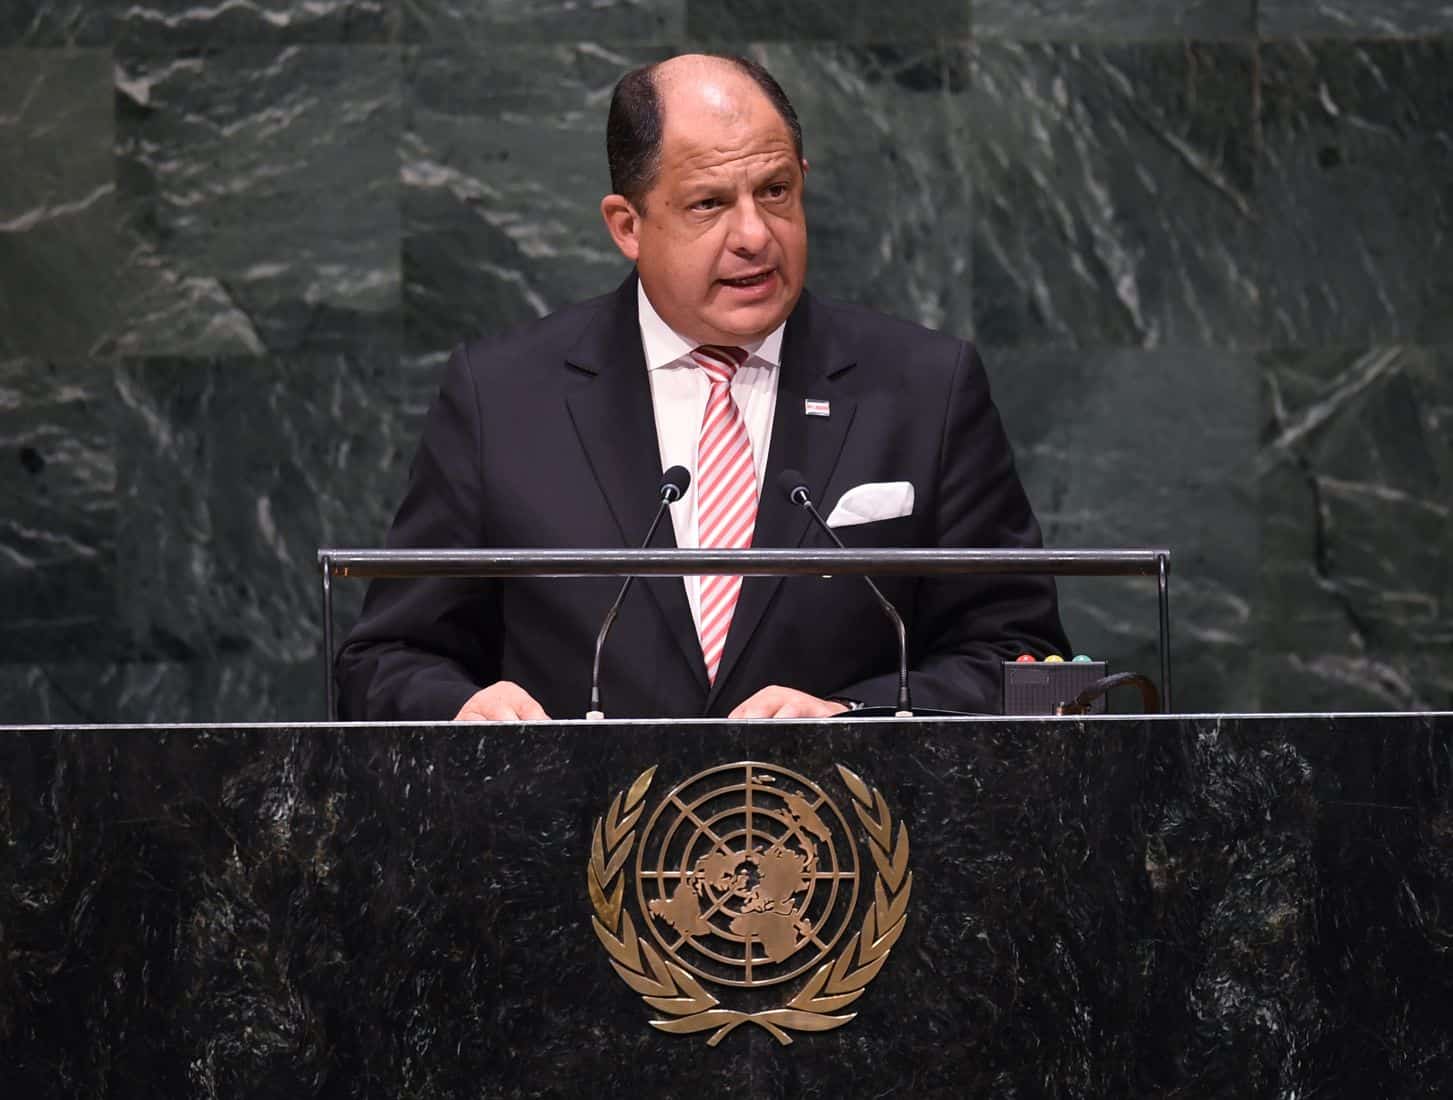 Costa Rican President Luis Guillermo Solís addresses the 69th session of the United Nations General Assembly.